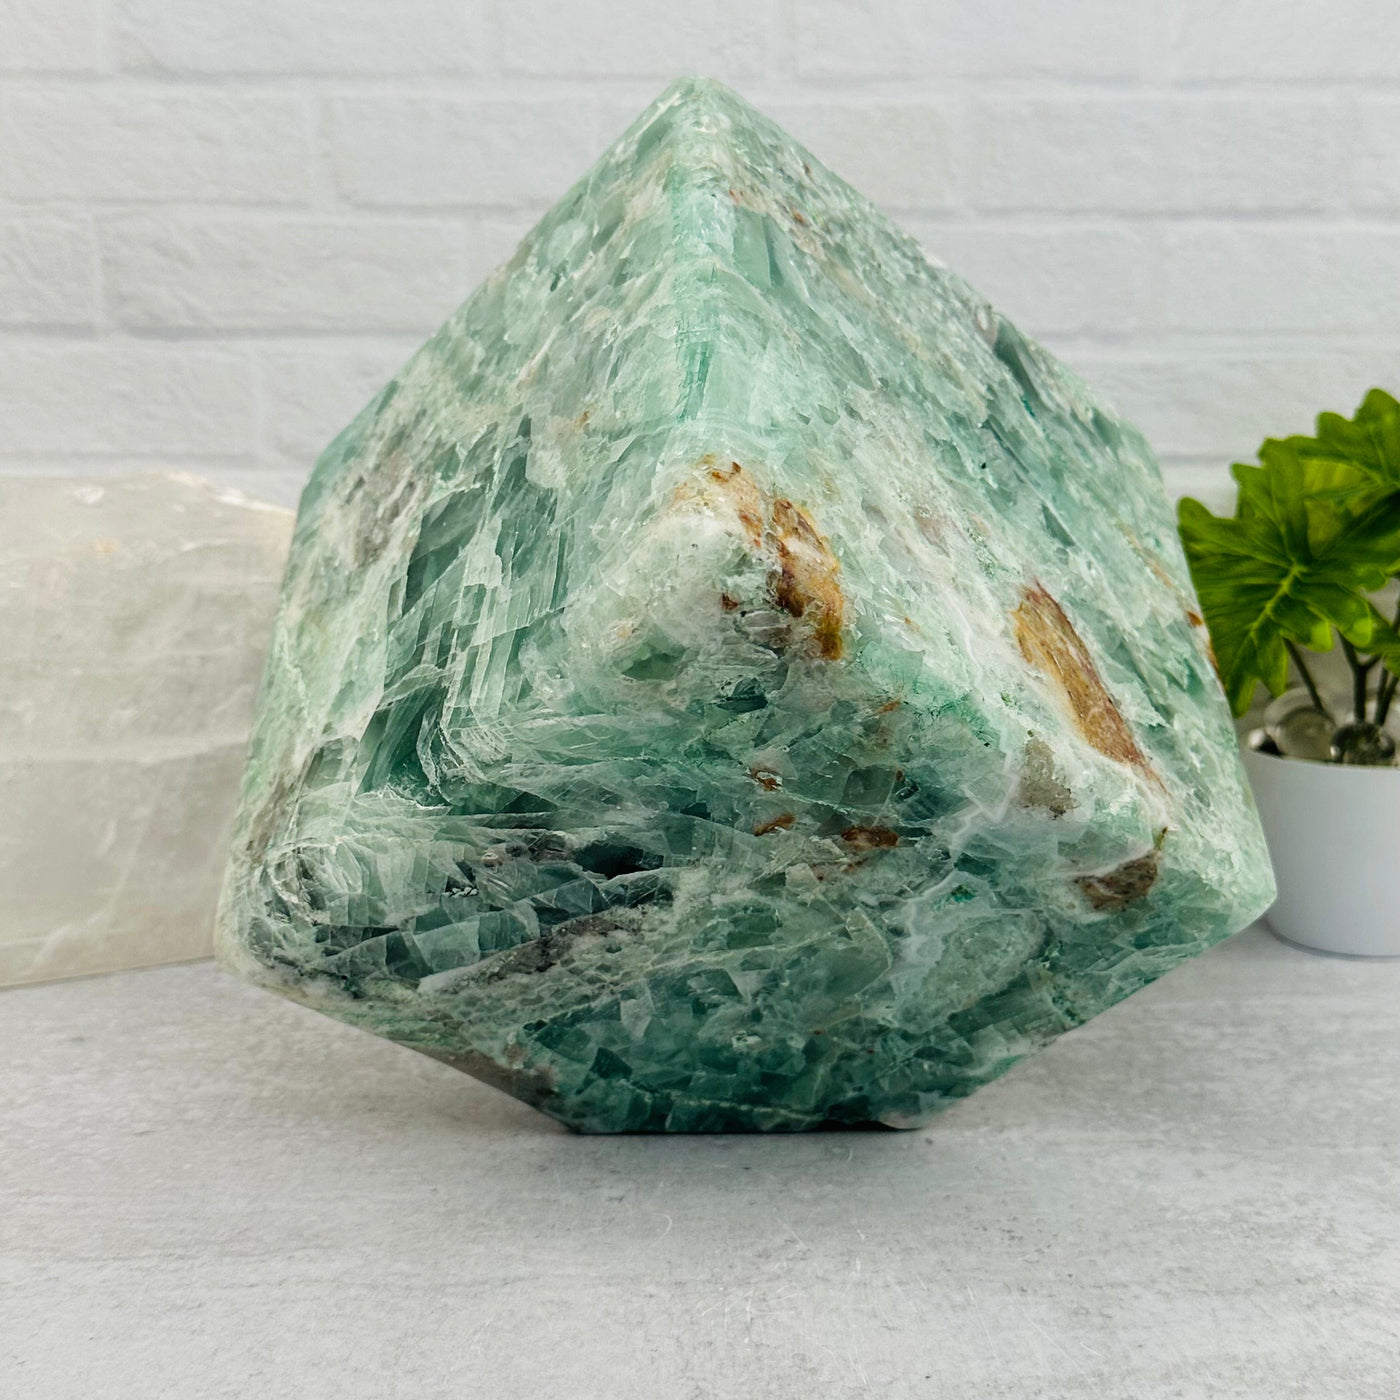 fluorite cube displayed as home decor 